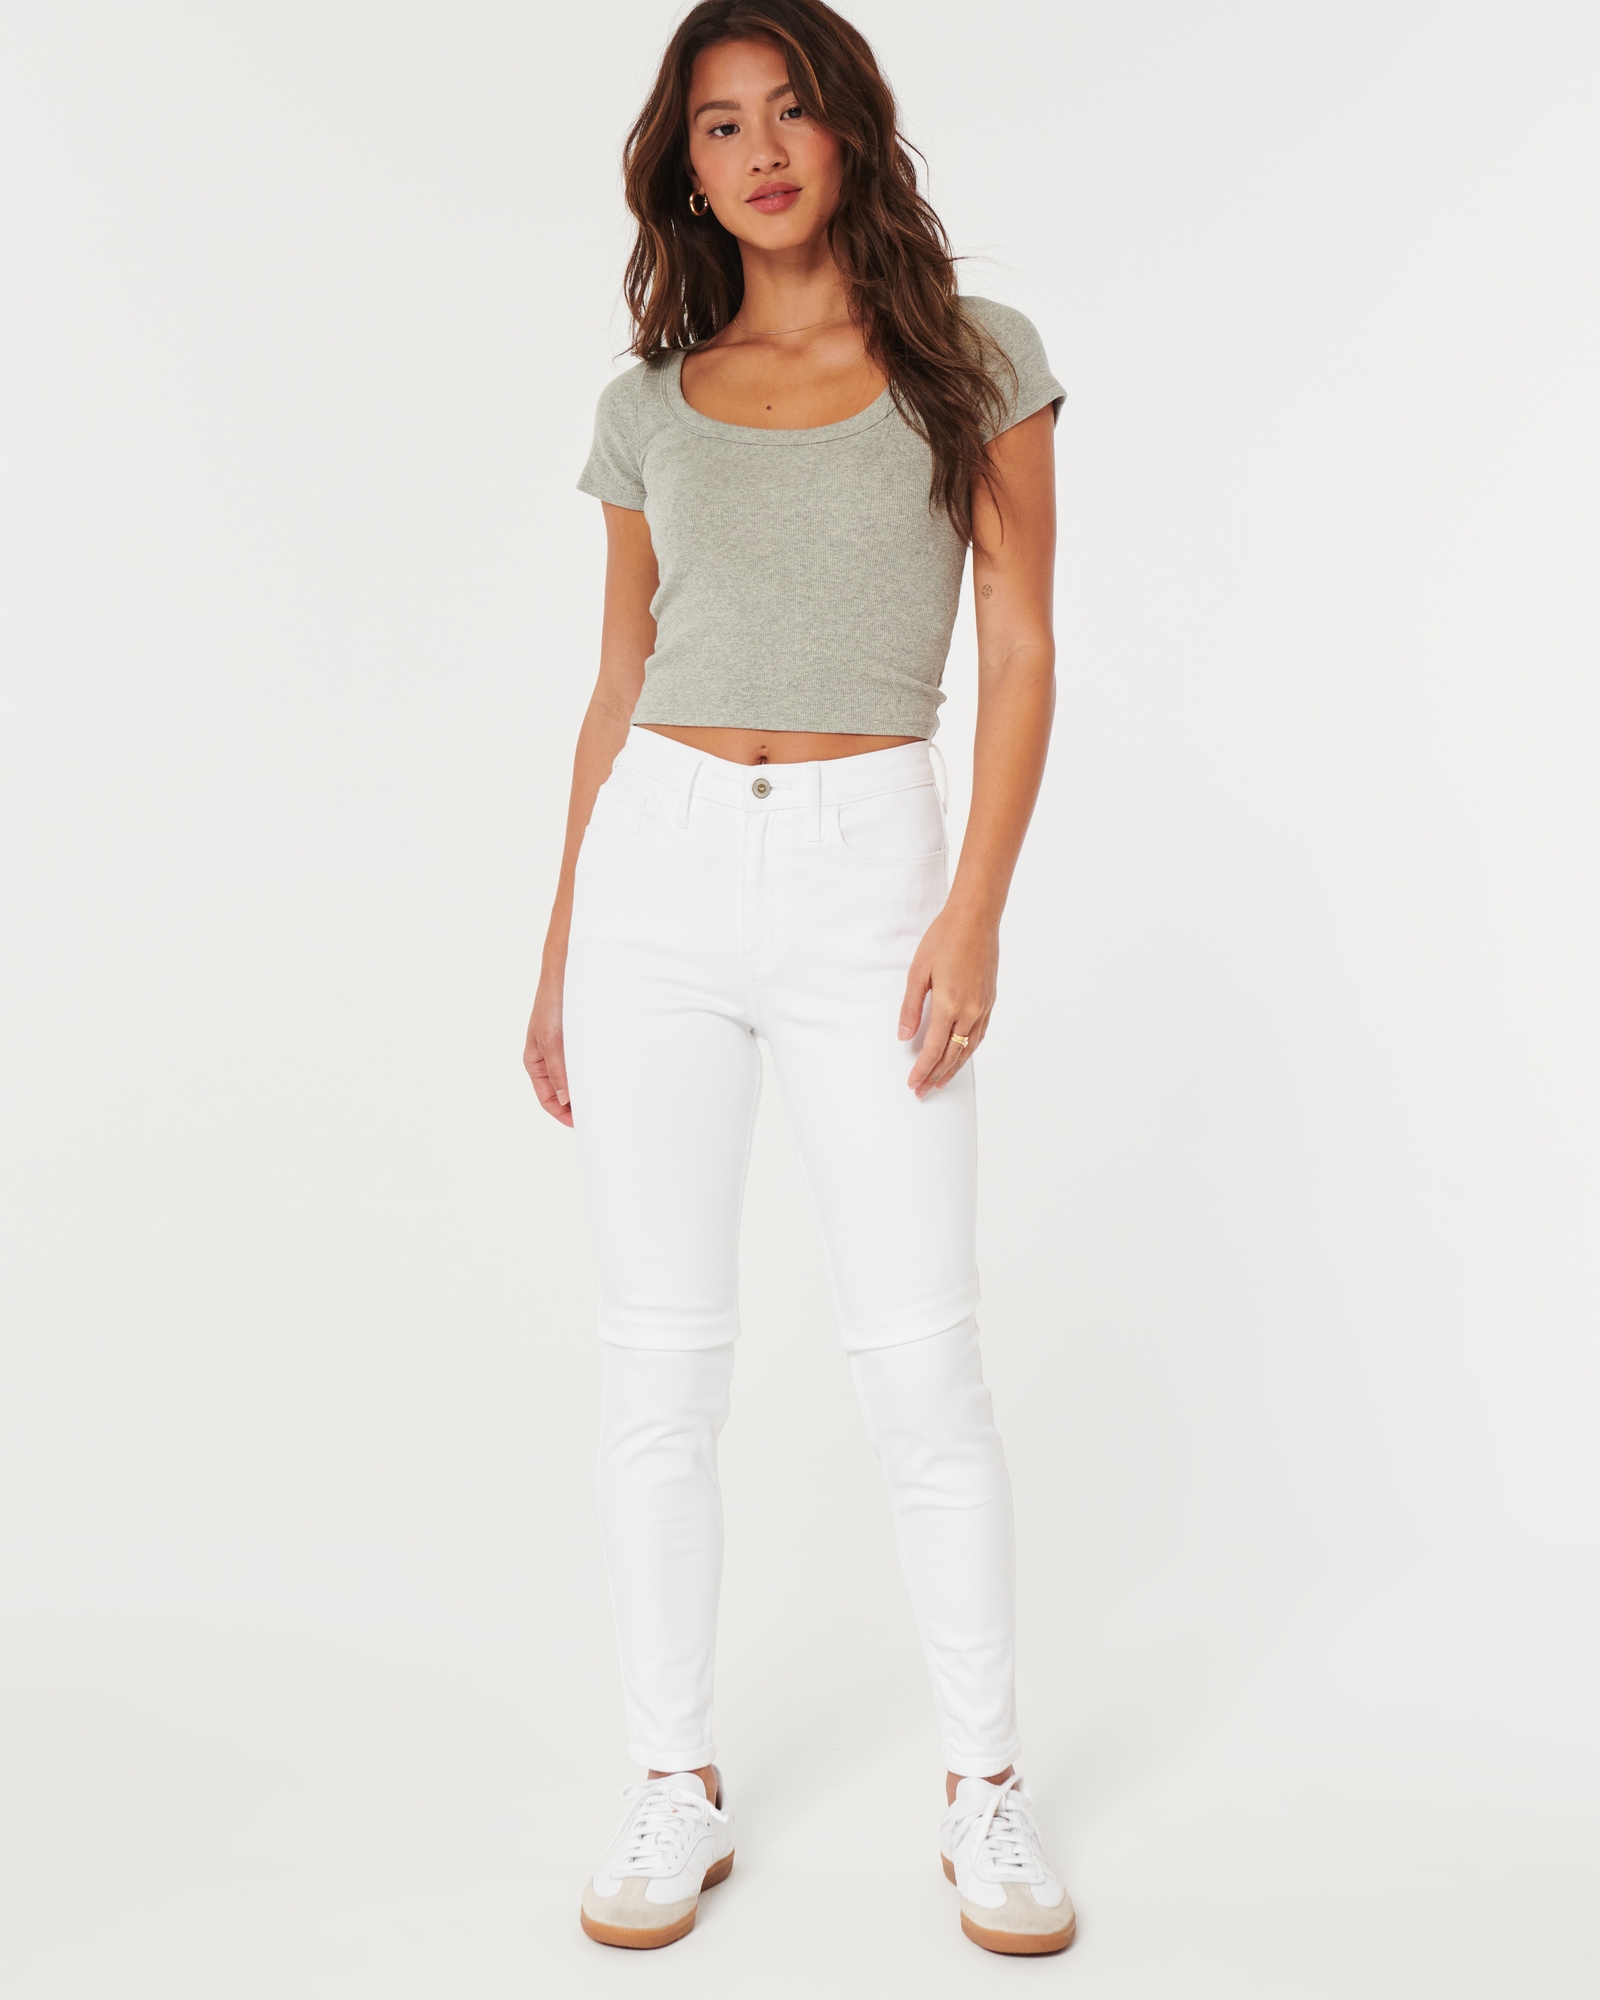 Hollister White High Rise Jean Leggings Size undefined - $16